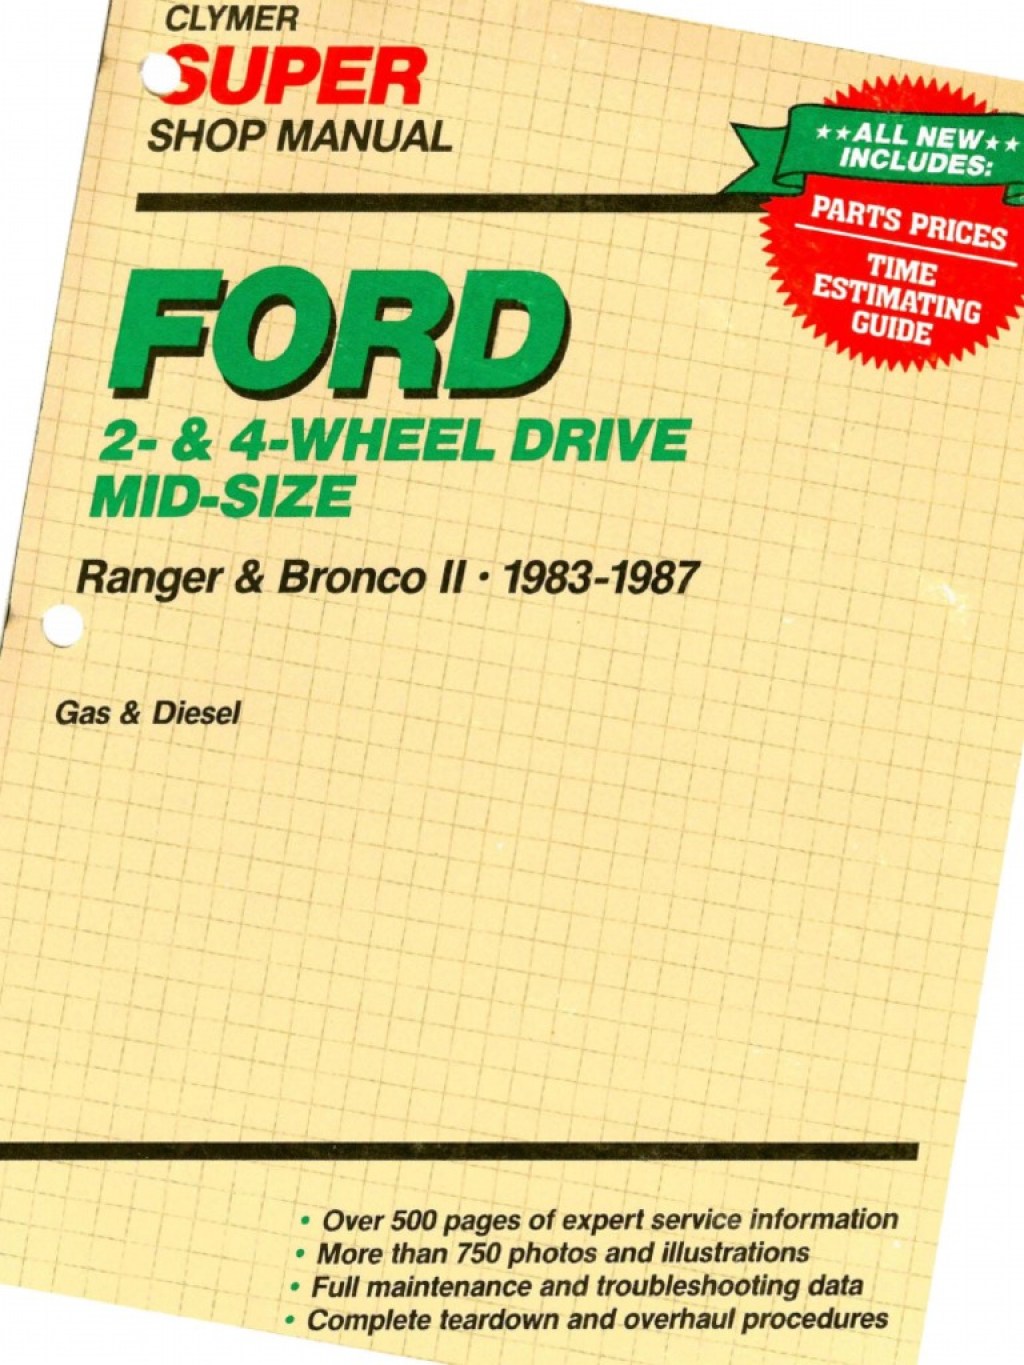 Picture of: FORD) Manual de Taller Ford Ranger    PDF  Screw  Nut